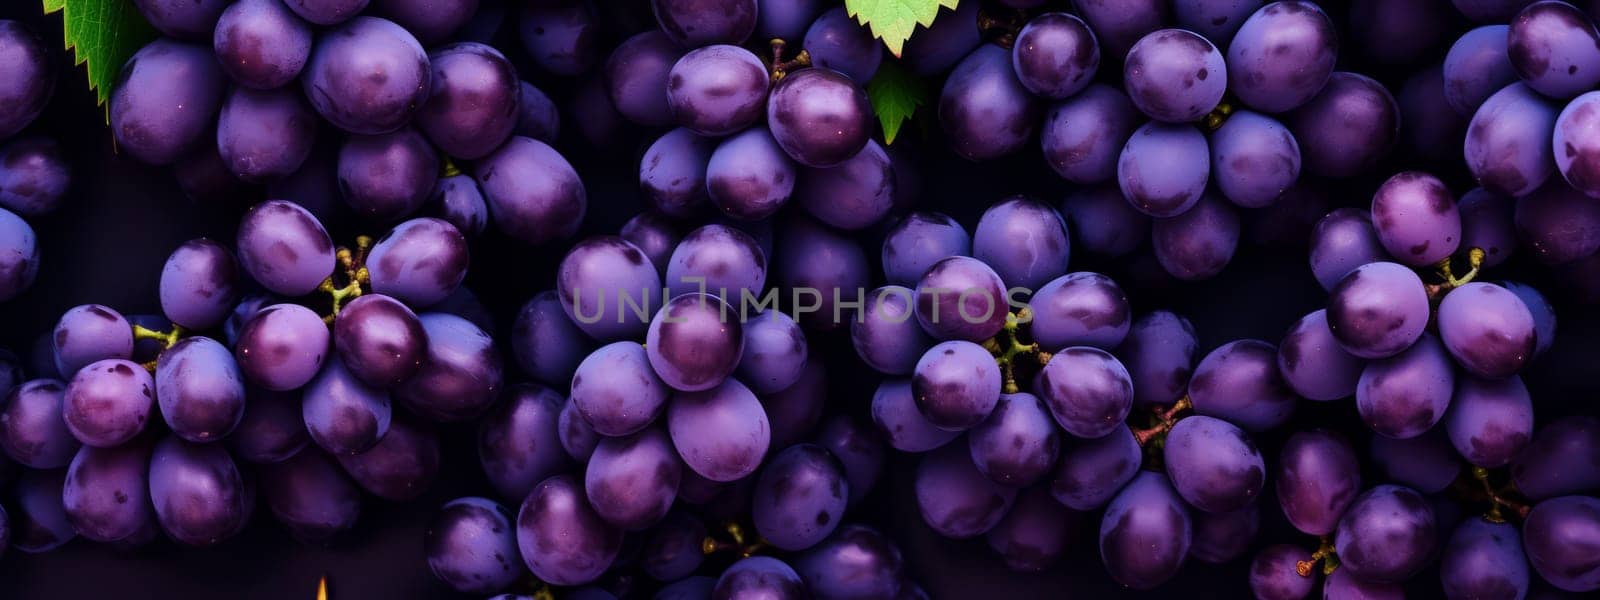 Close up of raw organic sweet red grapes background, wine grapes texture